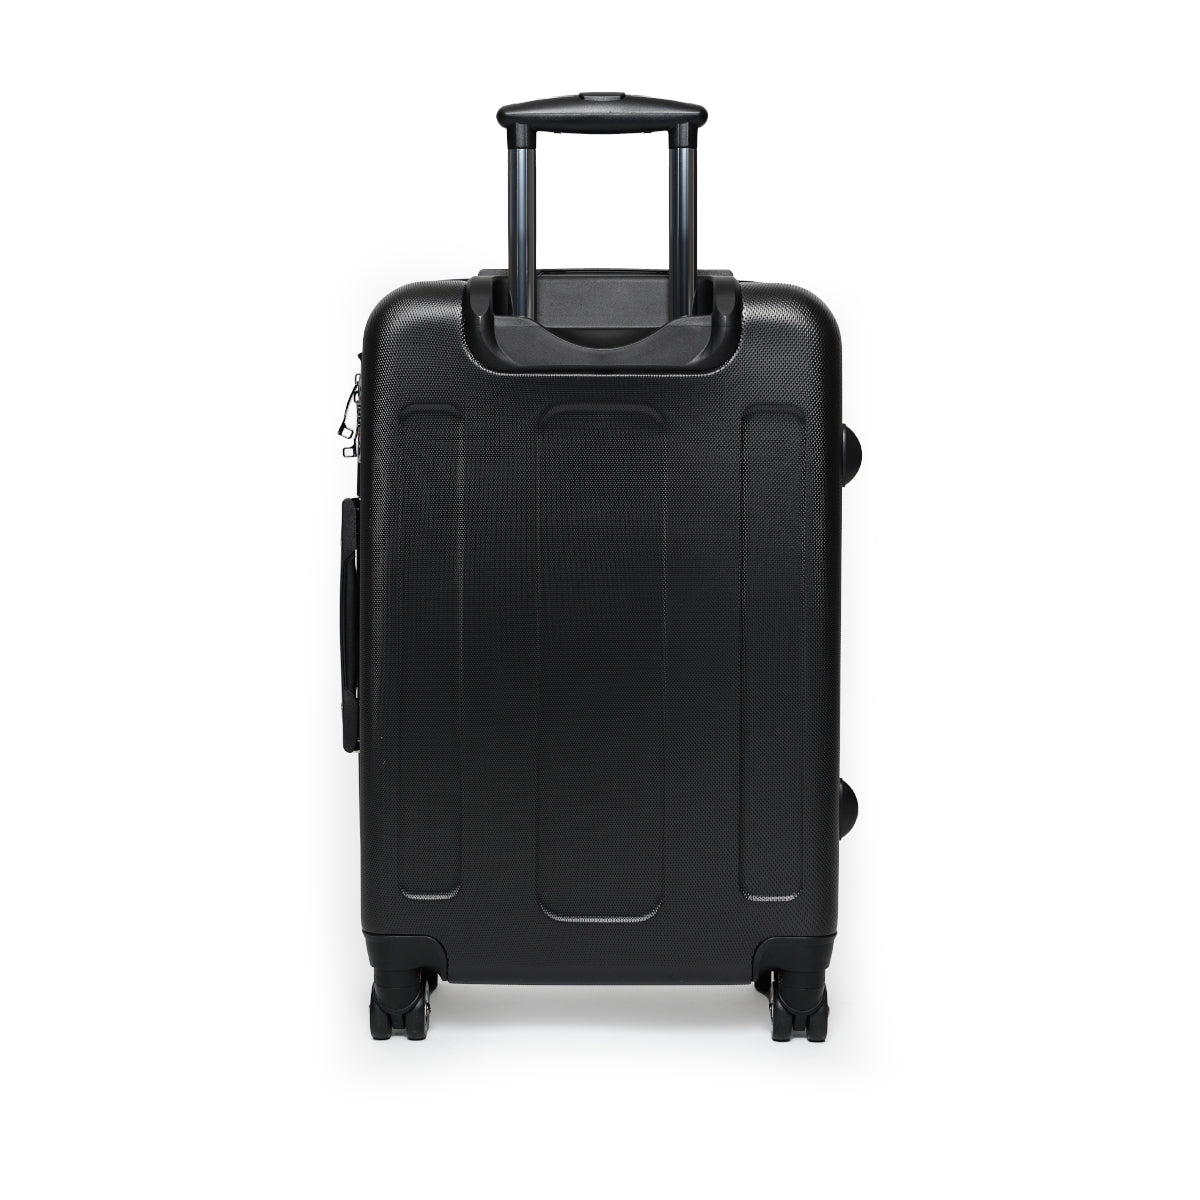 Getrott Belshazzars Feast by Rembrandt Black Cabin Suitcase Inner Pockets Extended Storage Adjustable Telescopic Handle Inner Pockets Double wheeled Polycarbonate Hard-shell Built-in Lock